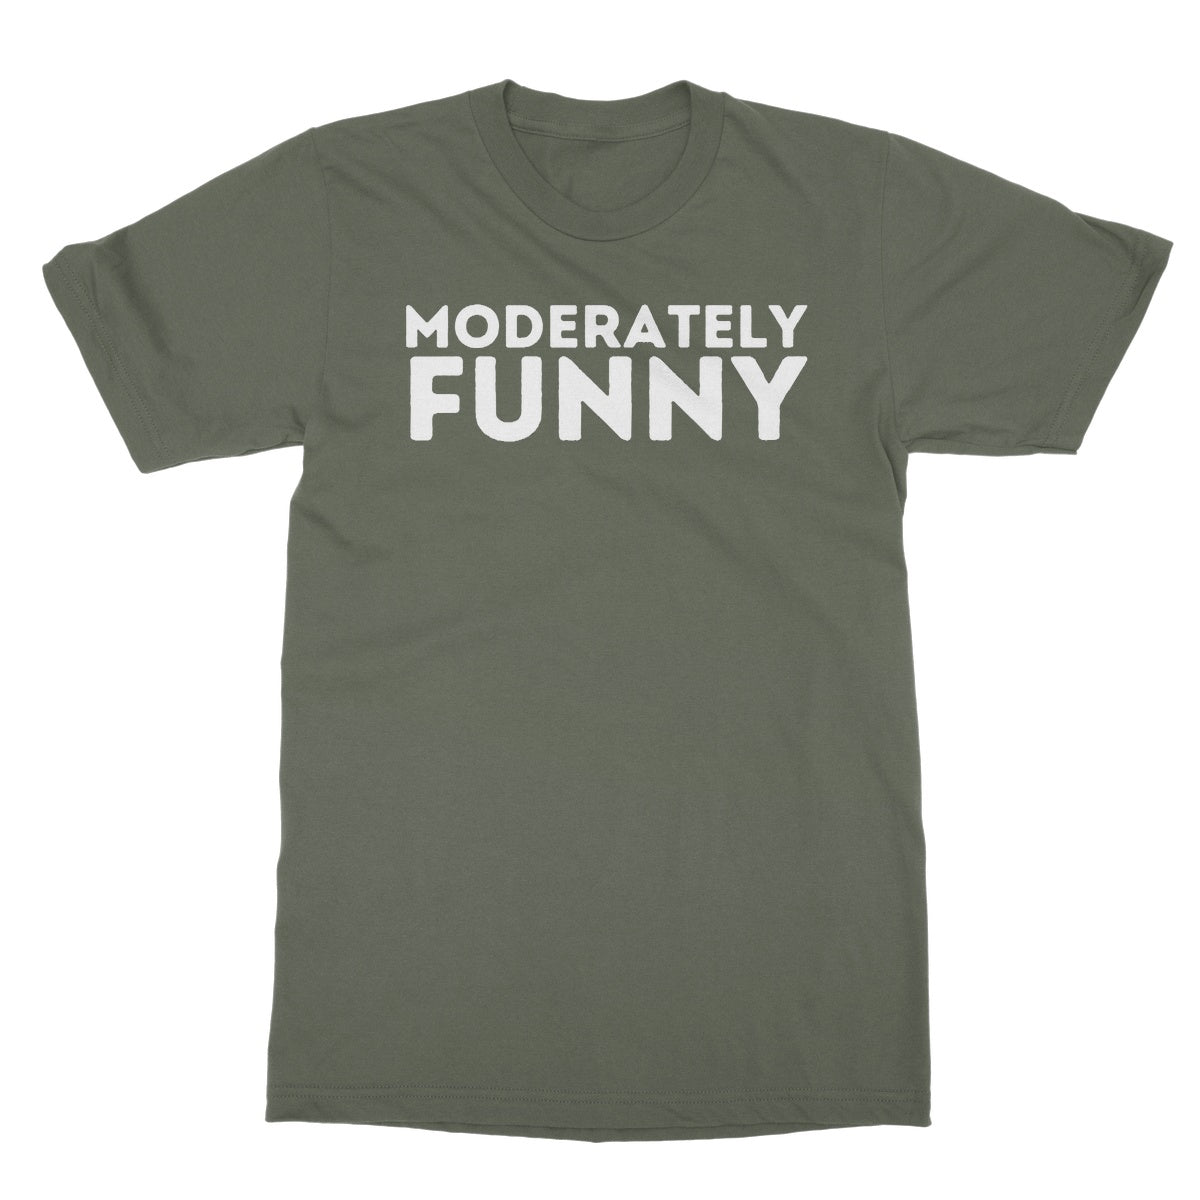 moderately funny t shirt green